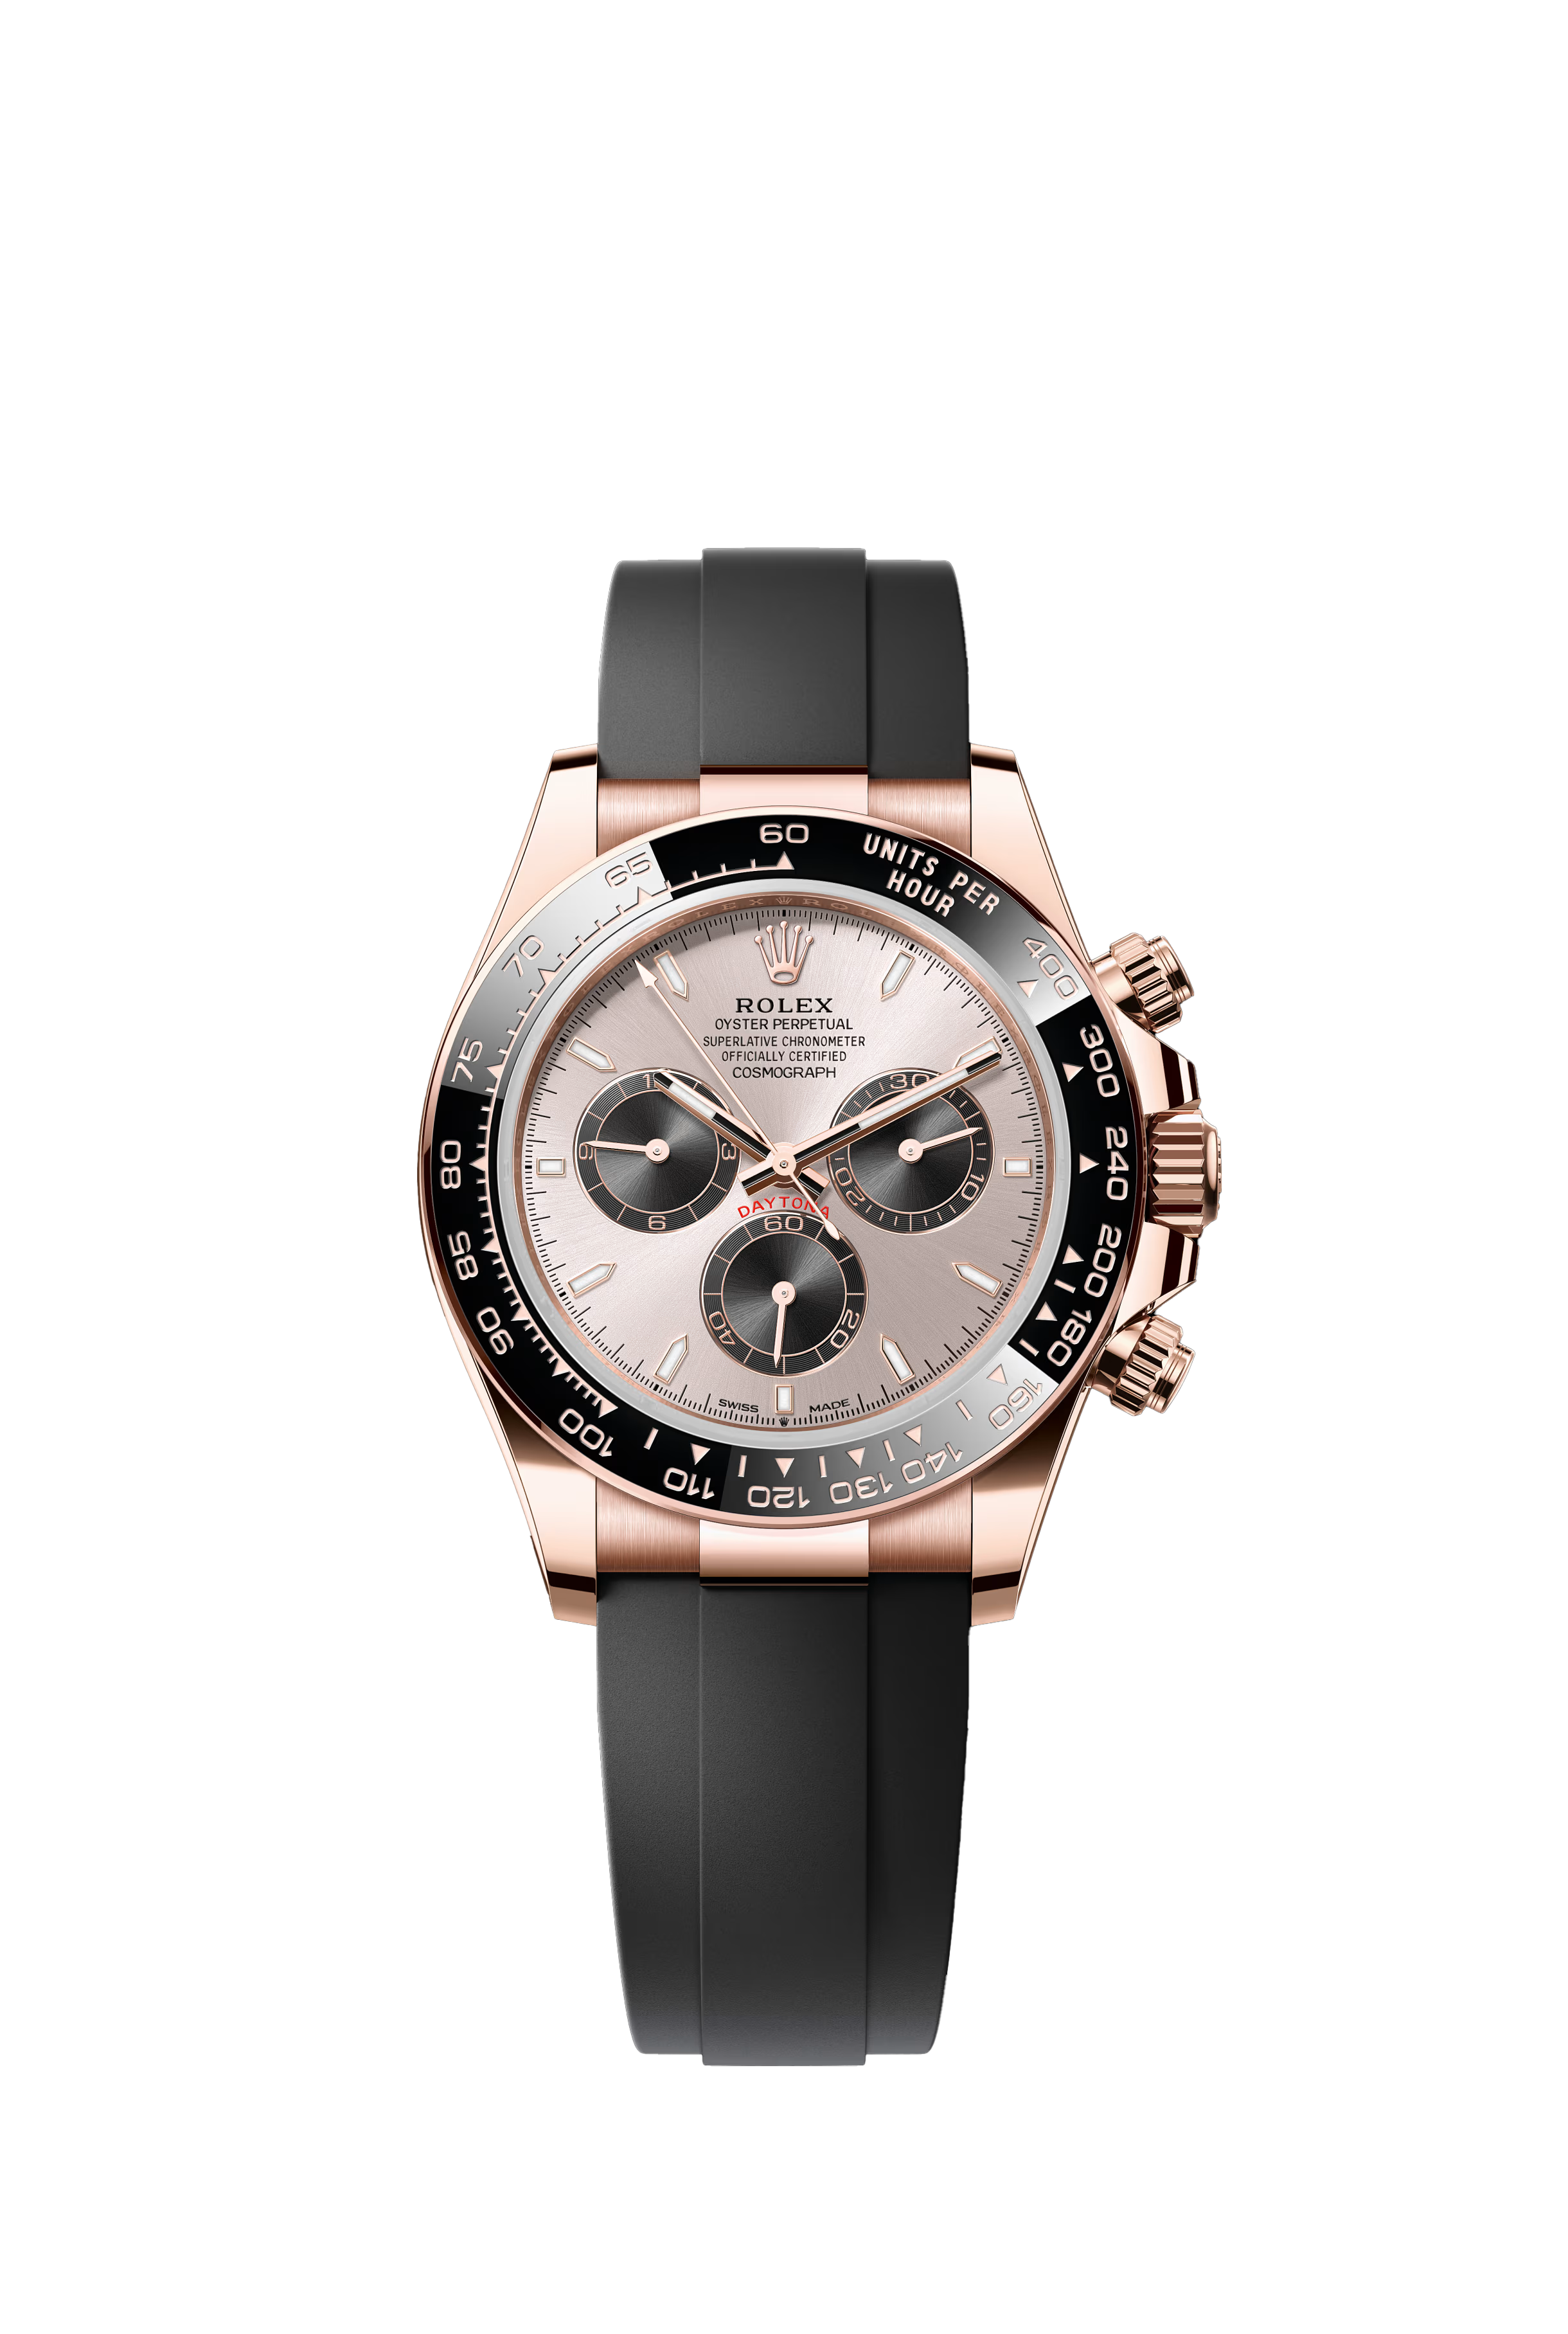 Rolex Cosmograph Daytona Oyster, 40 mm, Everose gold Reference 126515LN